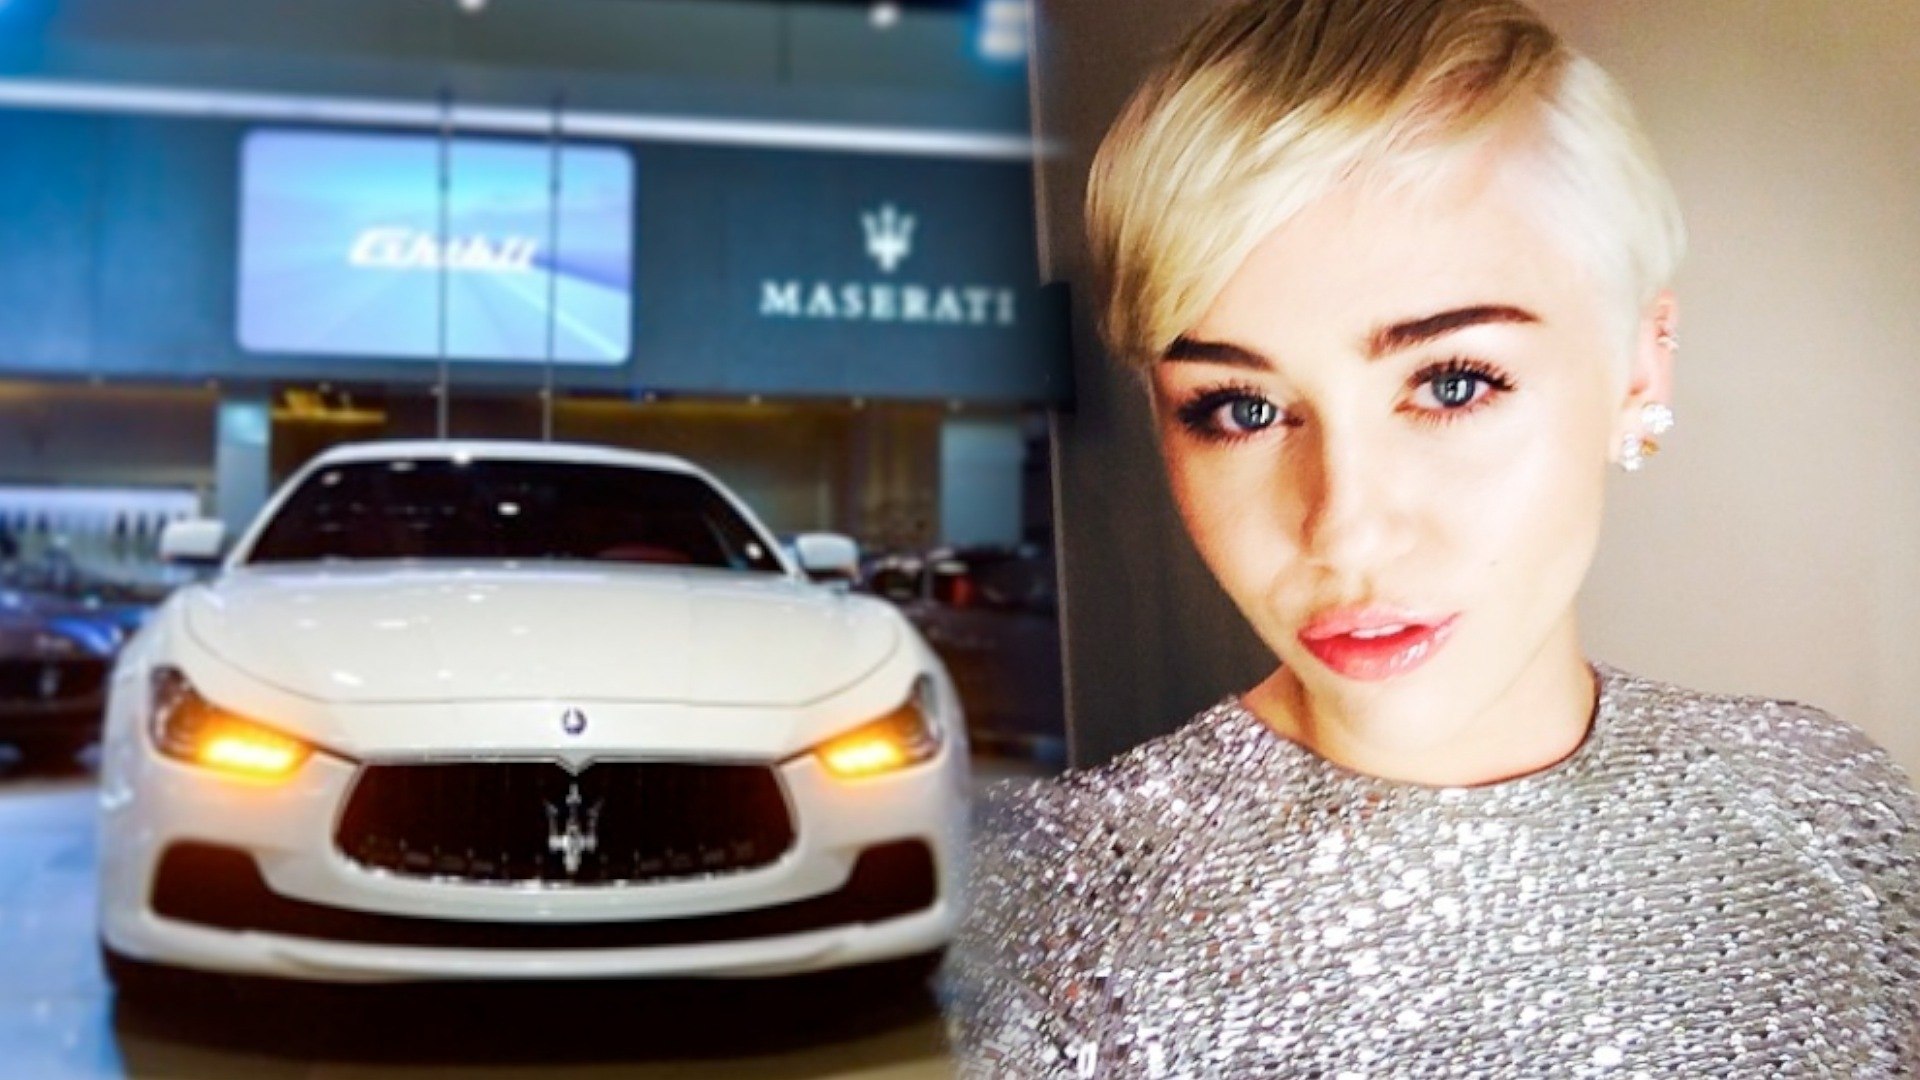 Miley Cyrus is the Victim of Grand Theft Auto: Maserati Stolen From Her Home